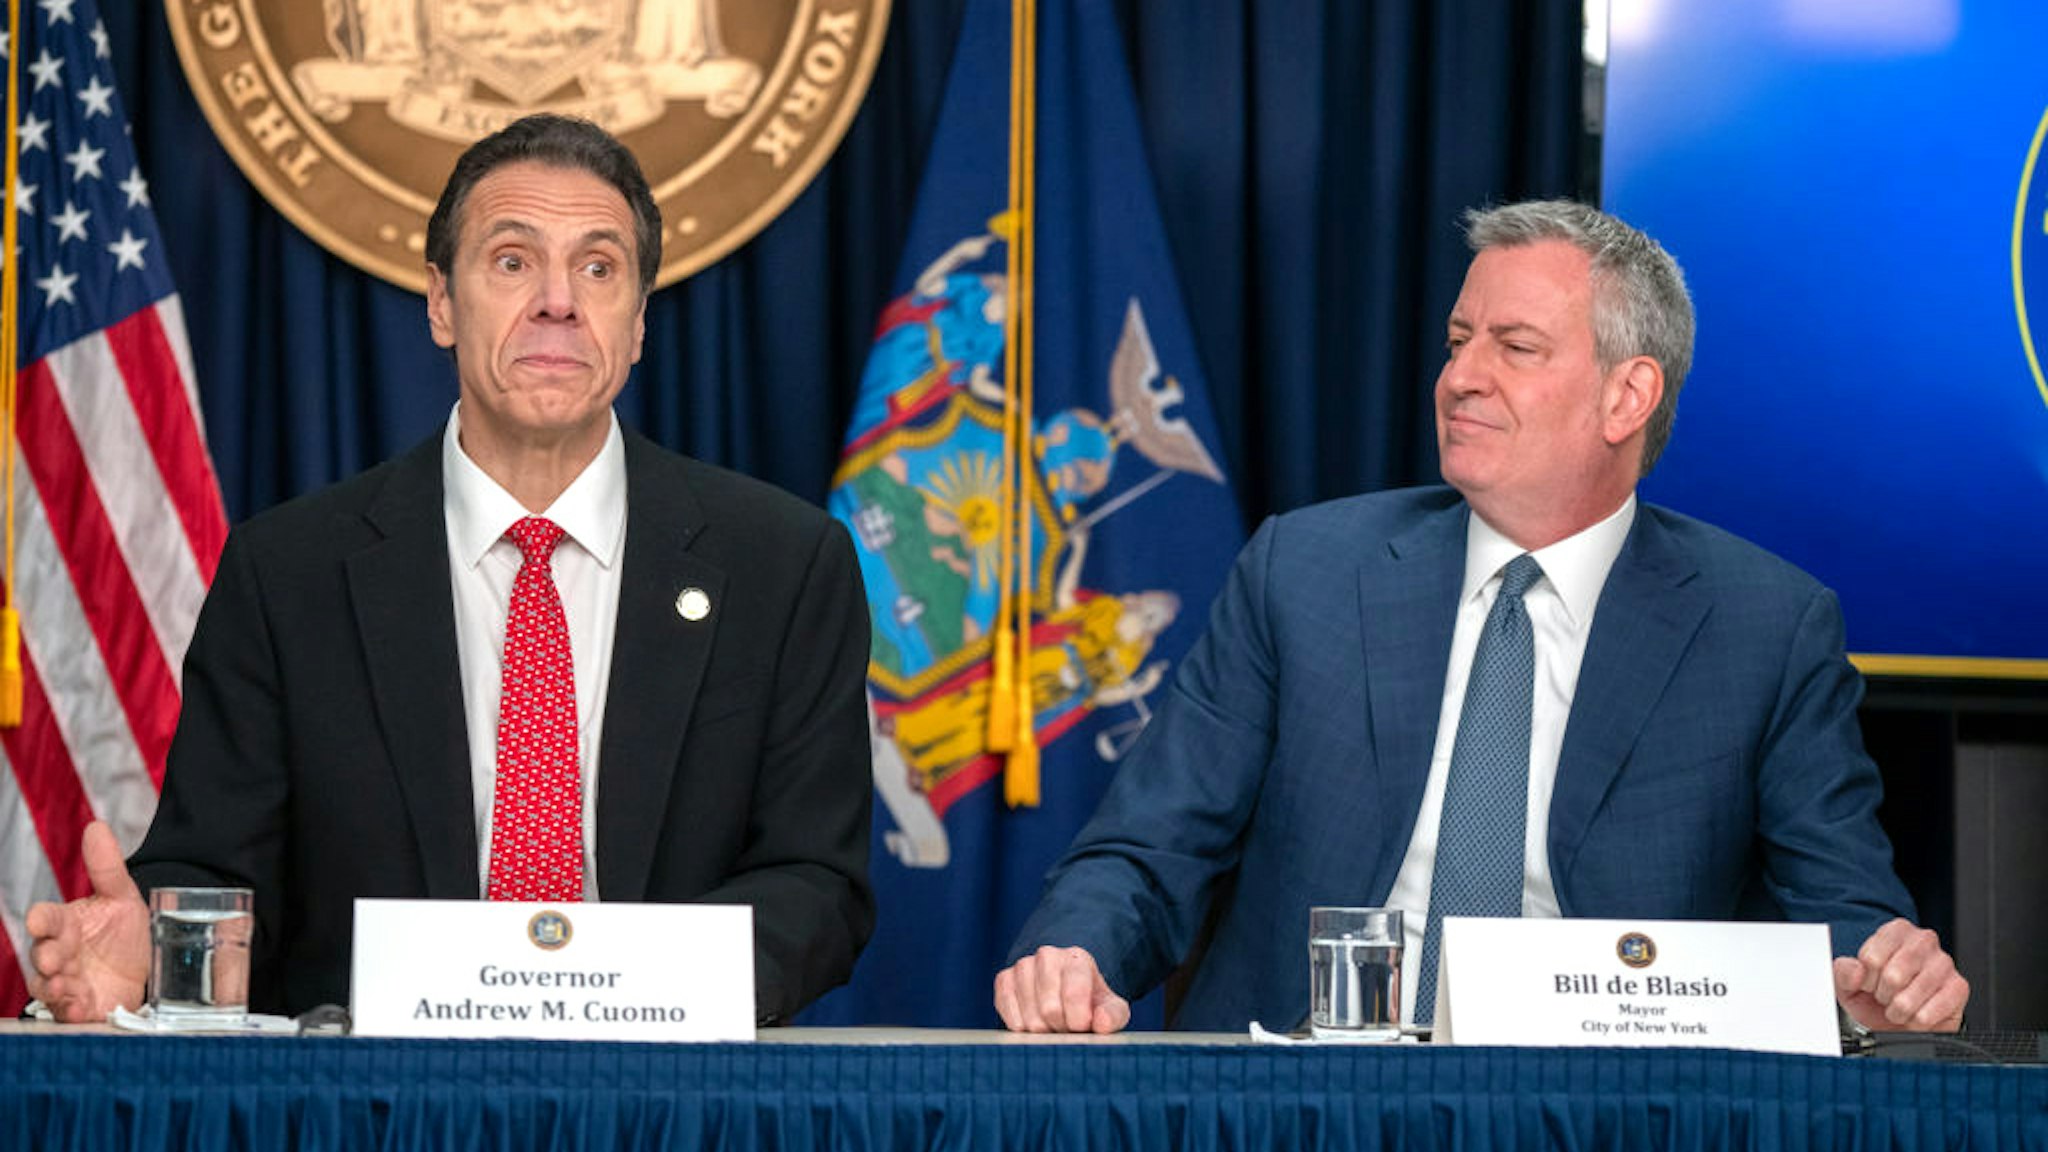 NEW YORK, NY - MARCH 2: New York state Gov. Andrew Cuomo and New York City Mayor Bill DeBlasio speak during a news conference on the first confirmed case of COVID-19 in New York on March 2, 2020 in New York City. A female health worker in her 30s who had traveled in Iran contracted the virus and is now isolated at home with symptoms of COVID-19, but is not in serious condition. Cuomo said in a statement that the patient "has been in a controlled situation since arriving to New York."